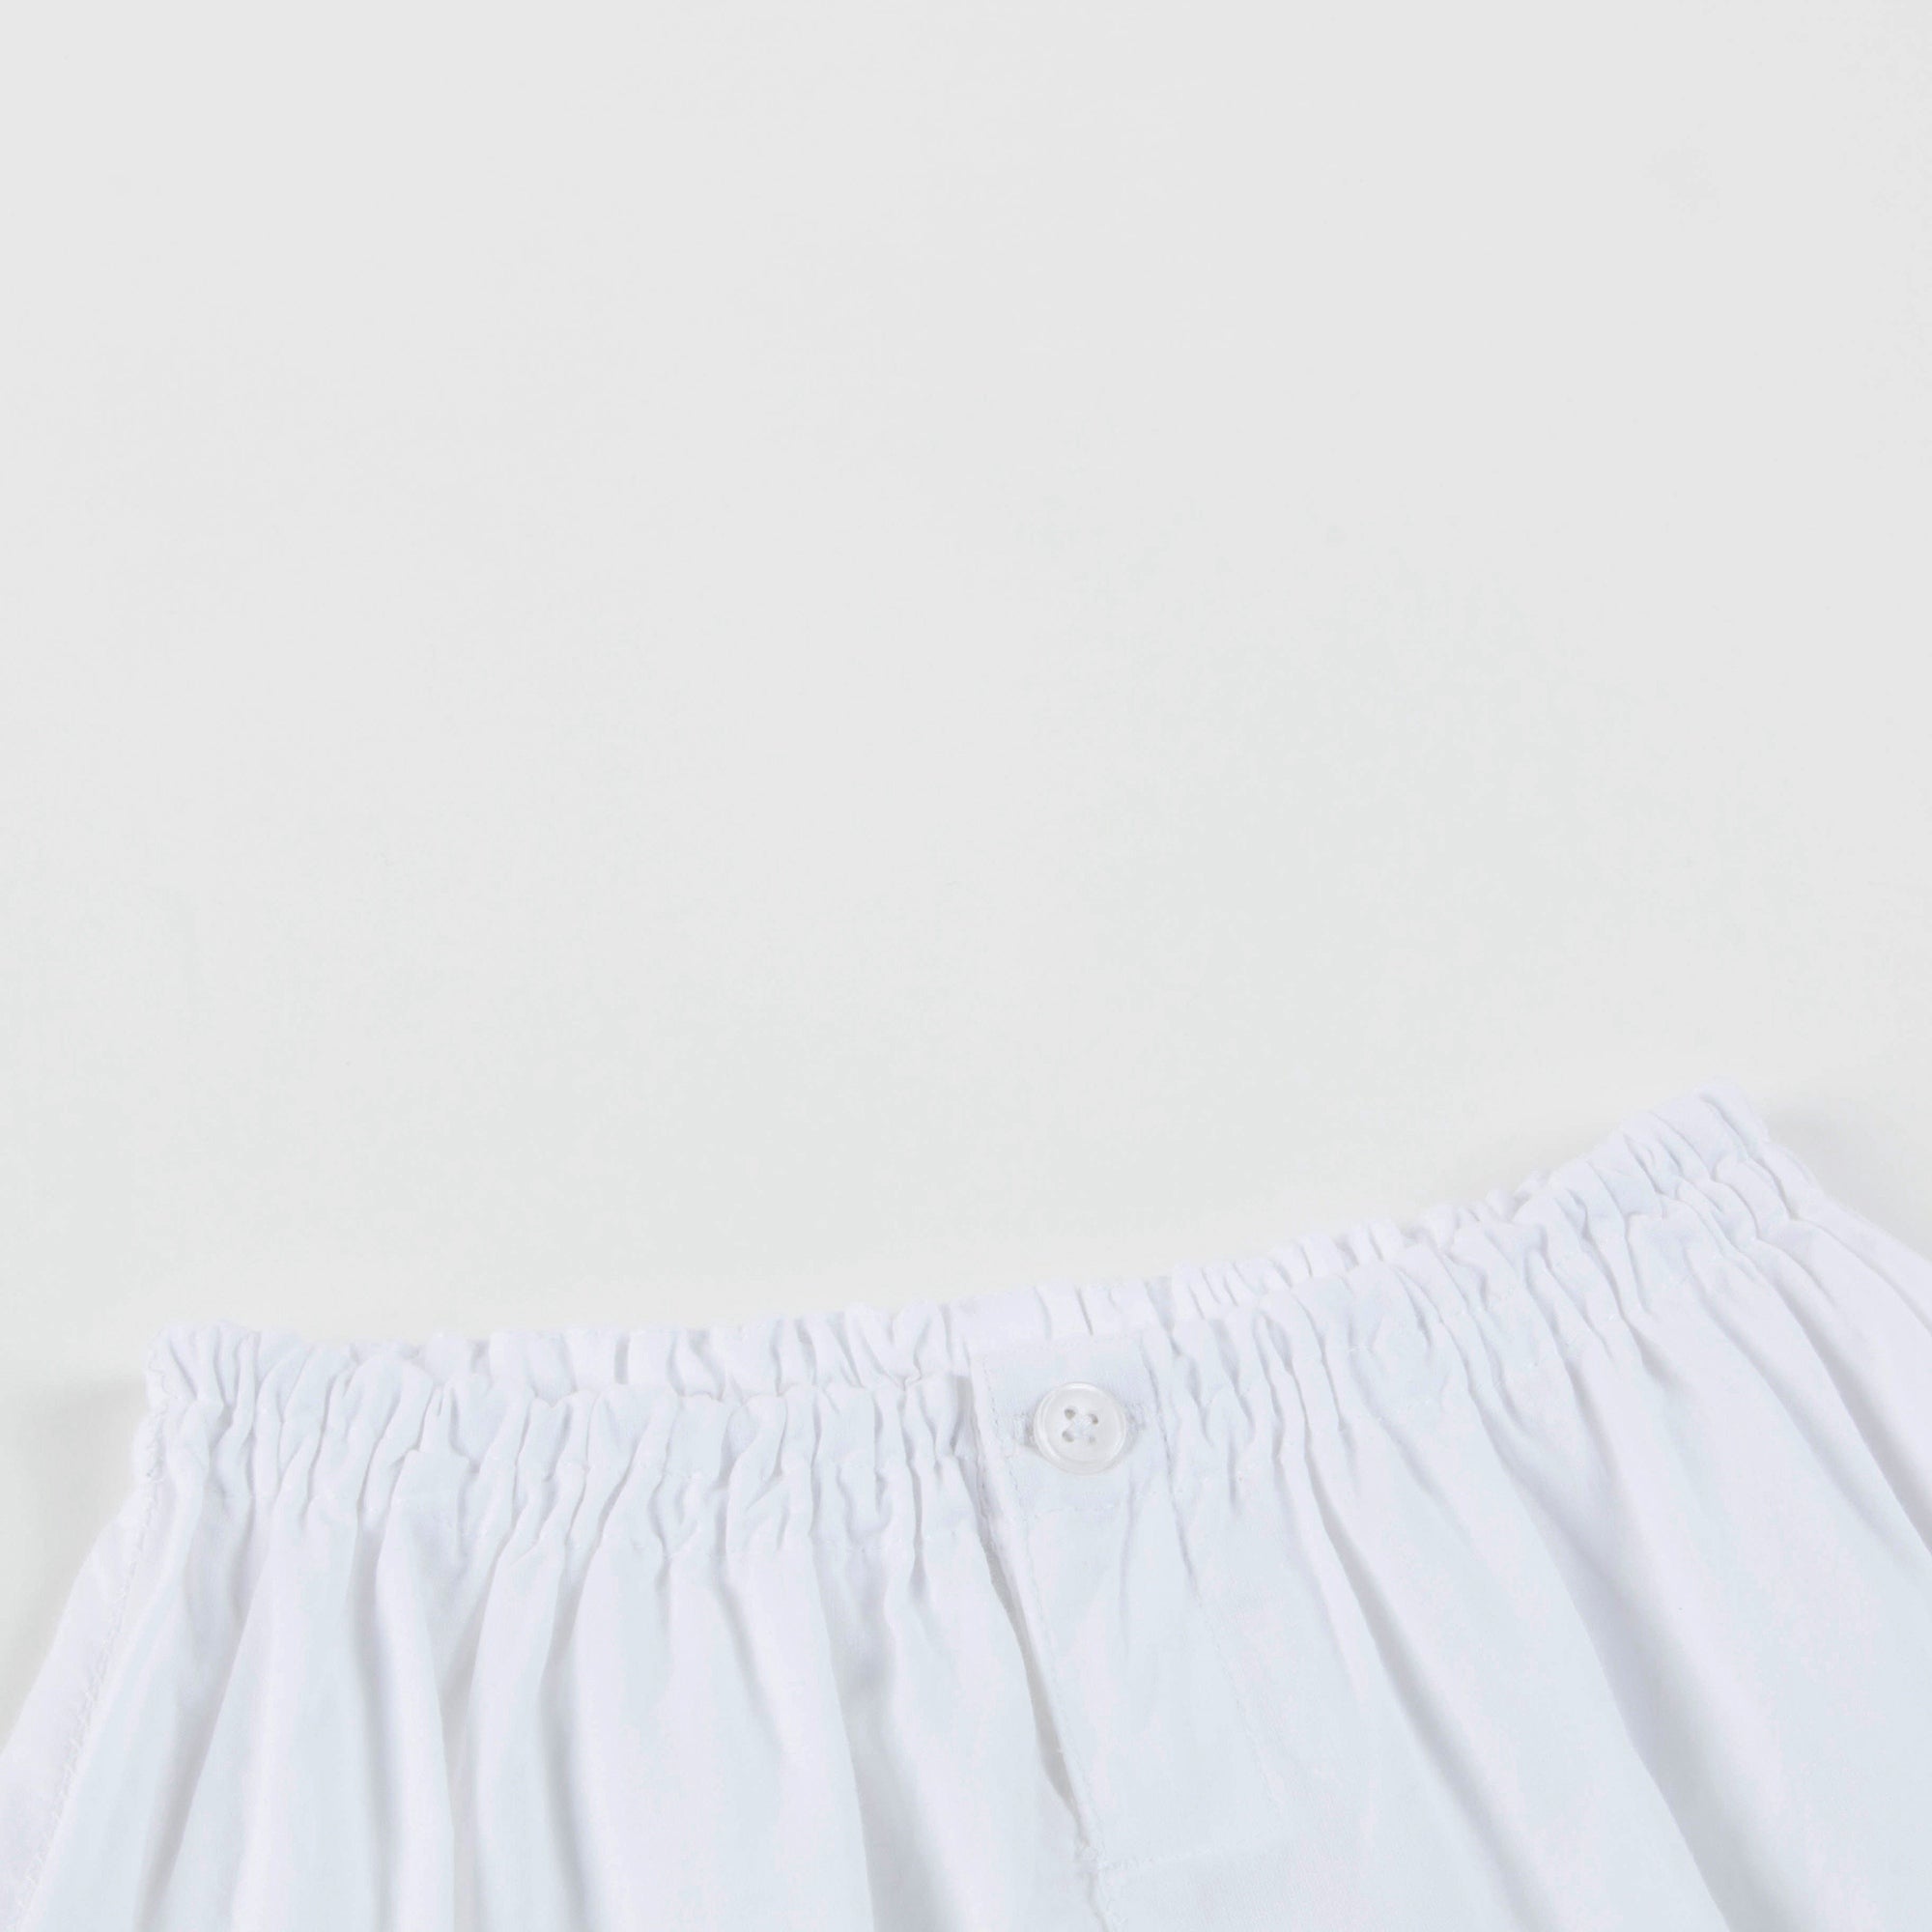 Baby White Cotton Woven Trousers